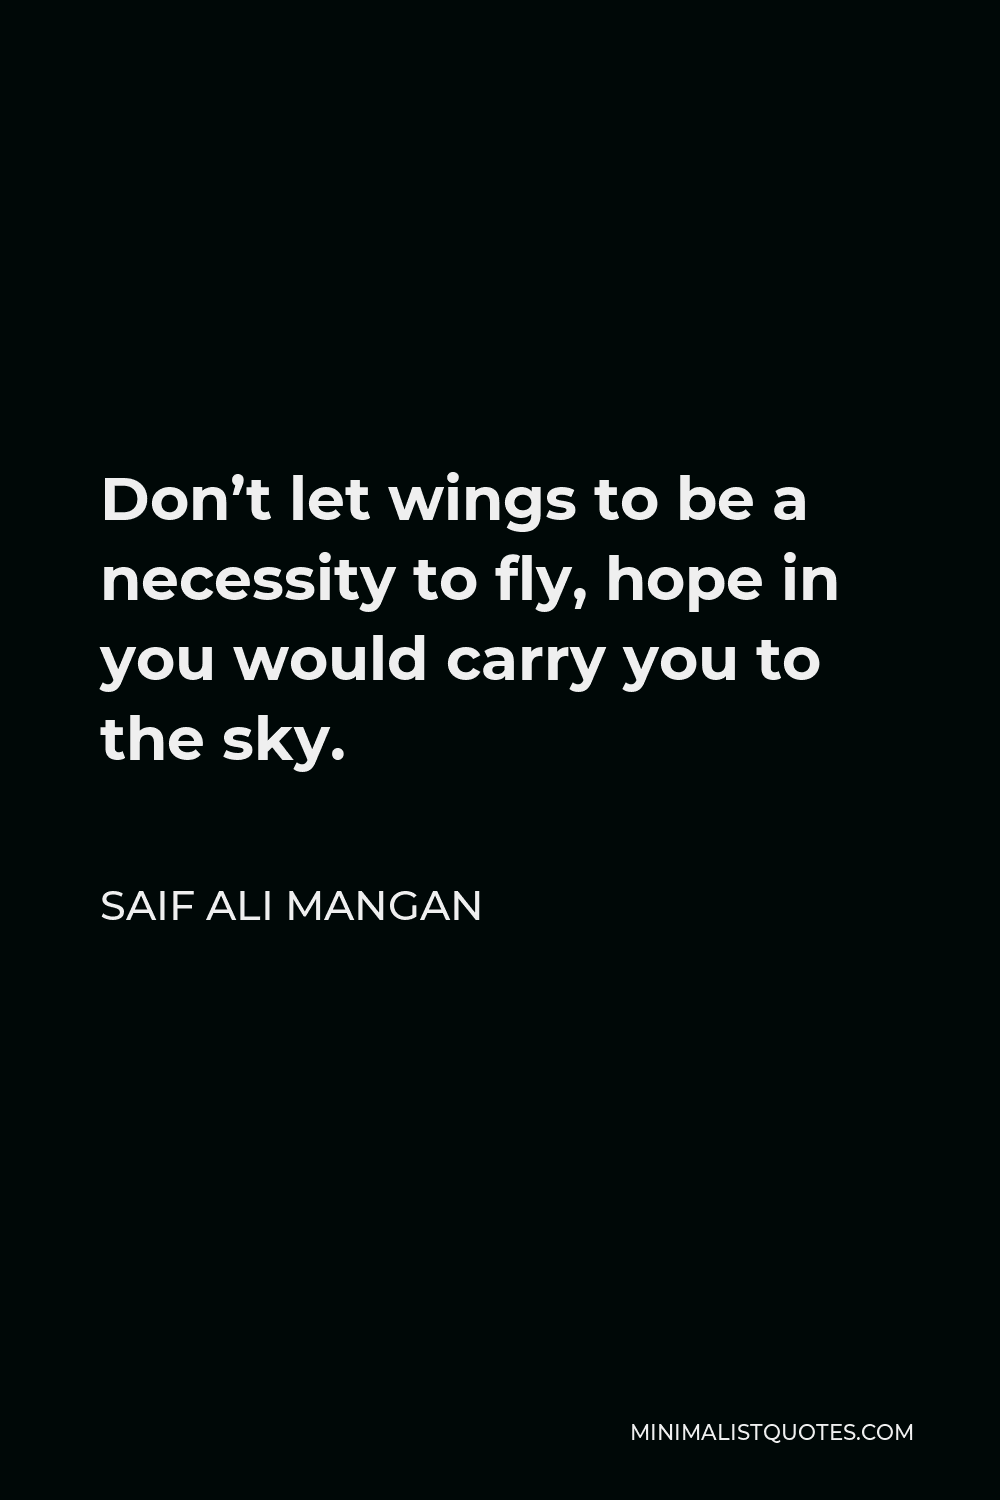 Saif Ali Mangan Quote - Don’t let wings to be a necessity to fly, hope in you would carry you to the sky.